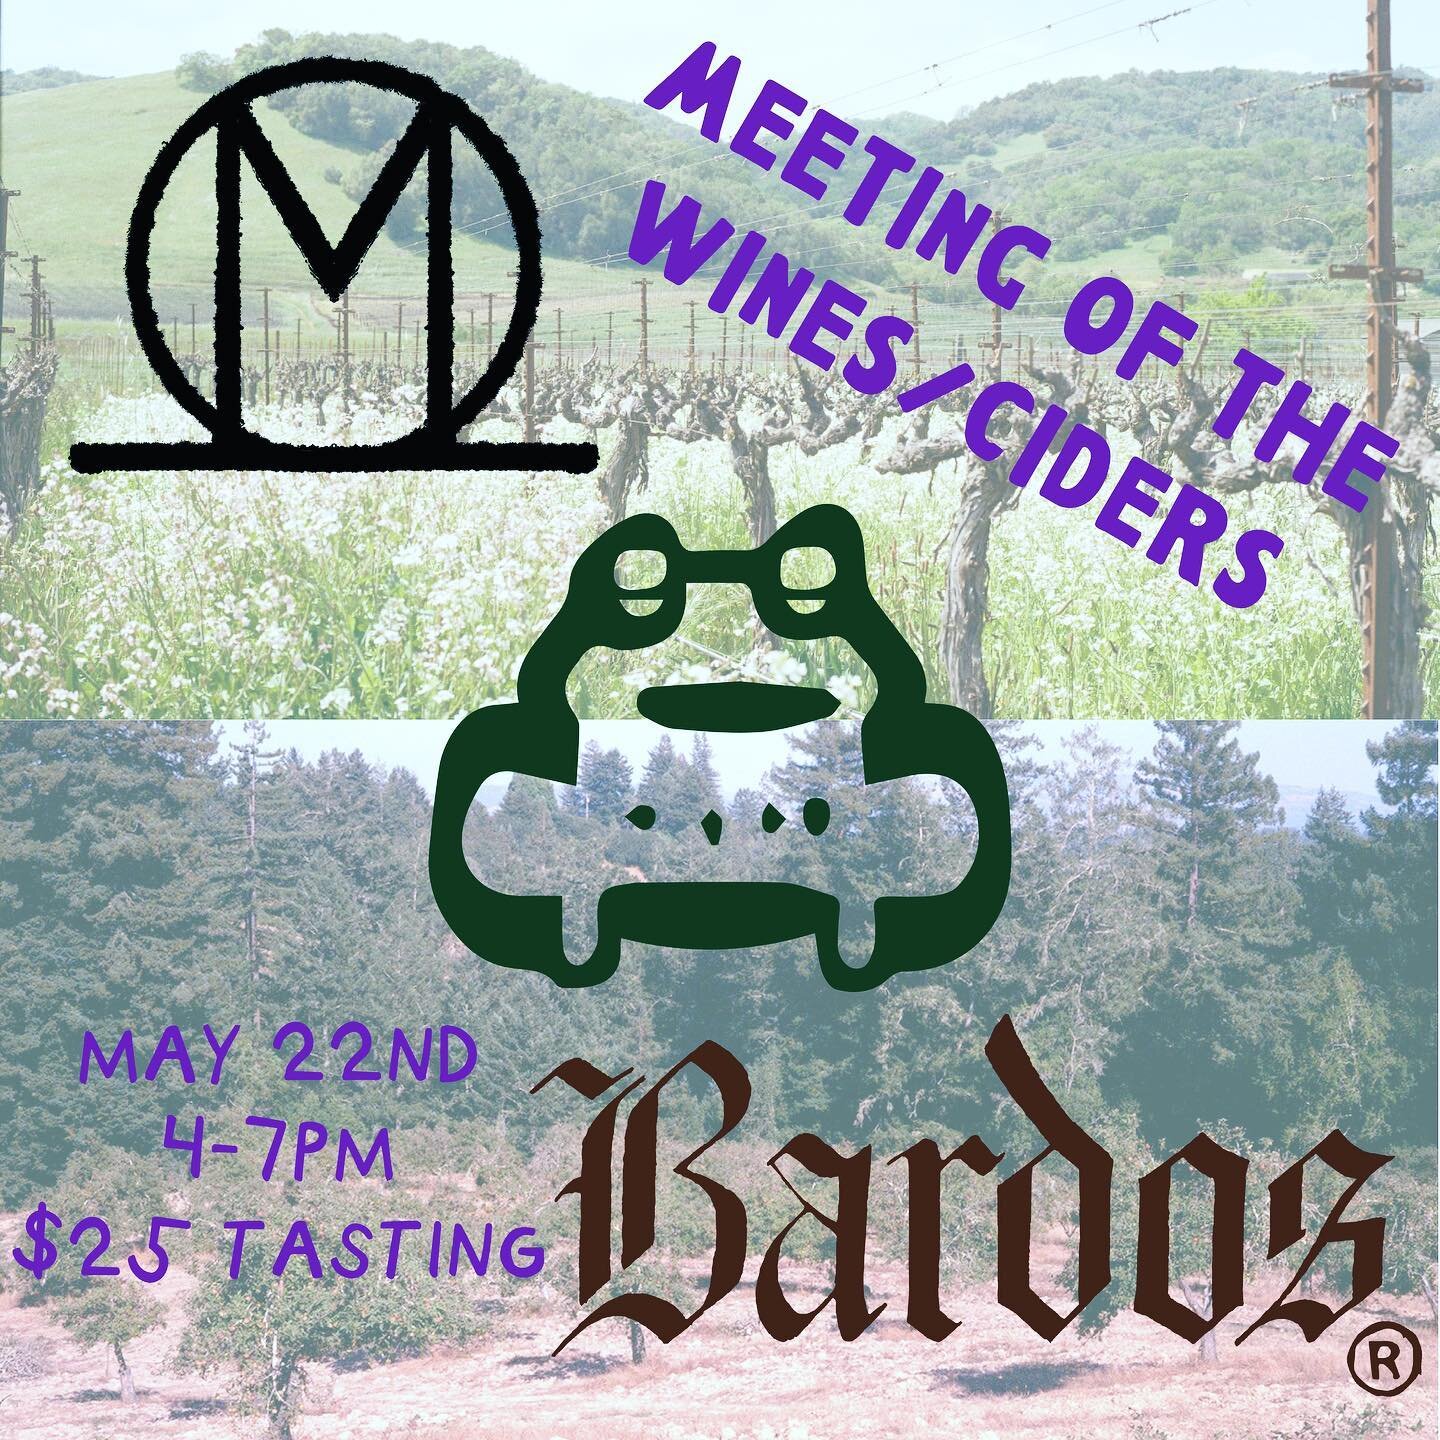 MEETING OF THE WINES ALERT ‼️ 

y'all our programming is finally back - come and hang at the shop on Monday 5/22 with some of our favorite California producers @marioniwine and @bardoscider !!! Celebrate the release of their first collaboration wine 